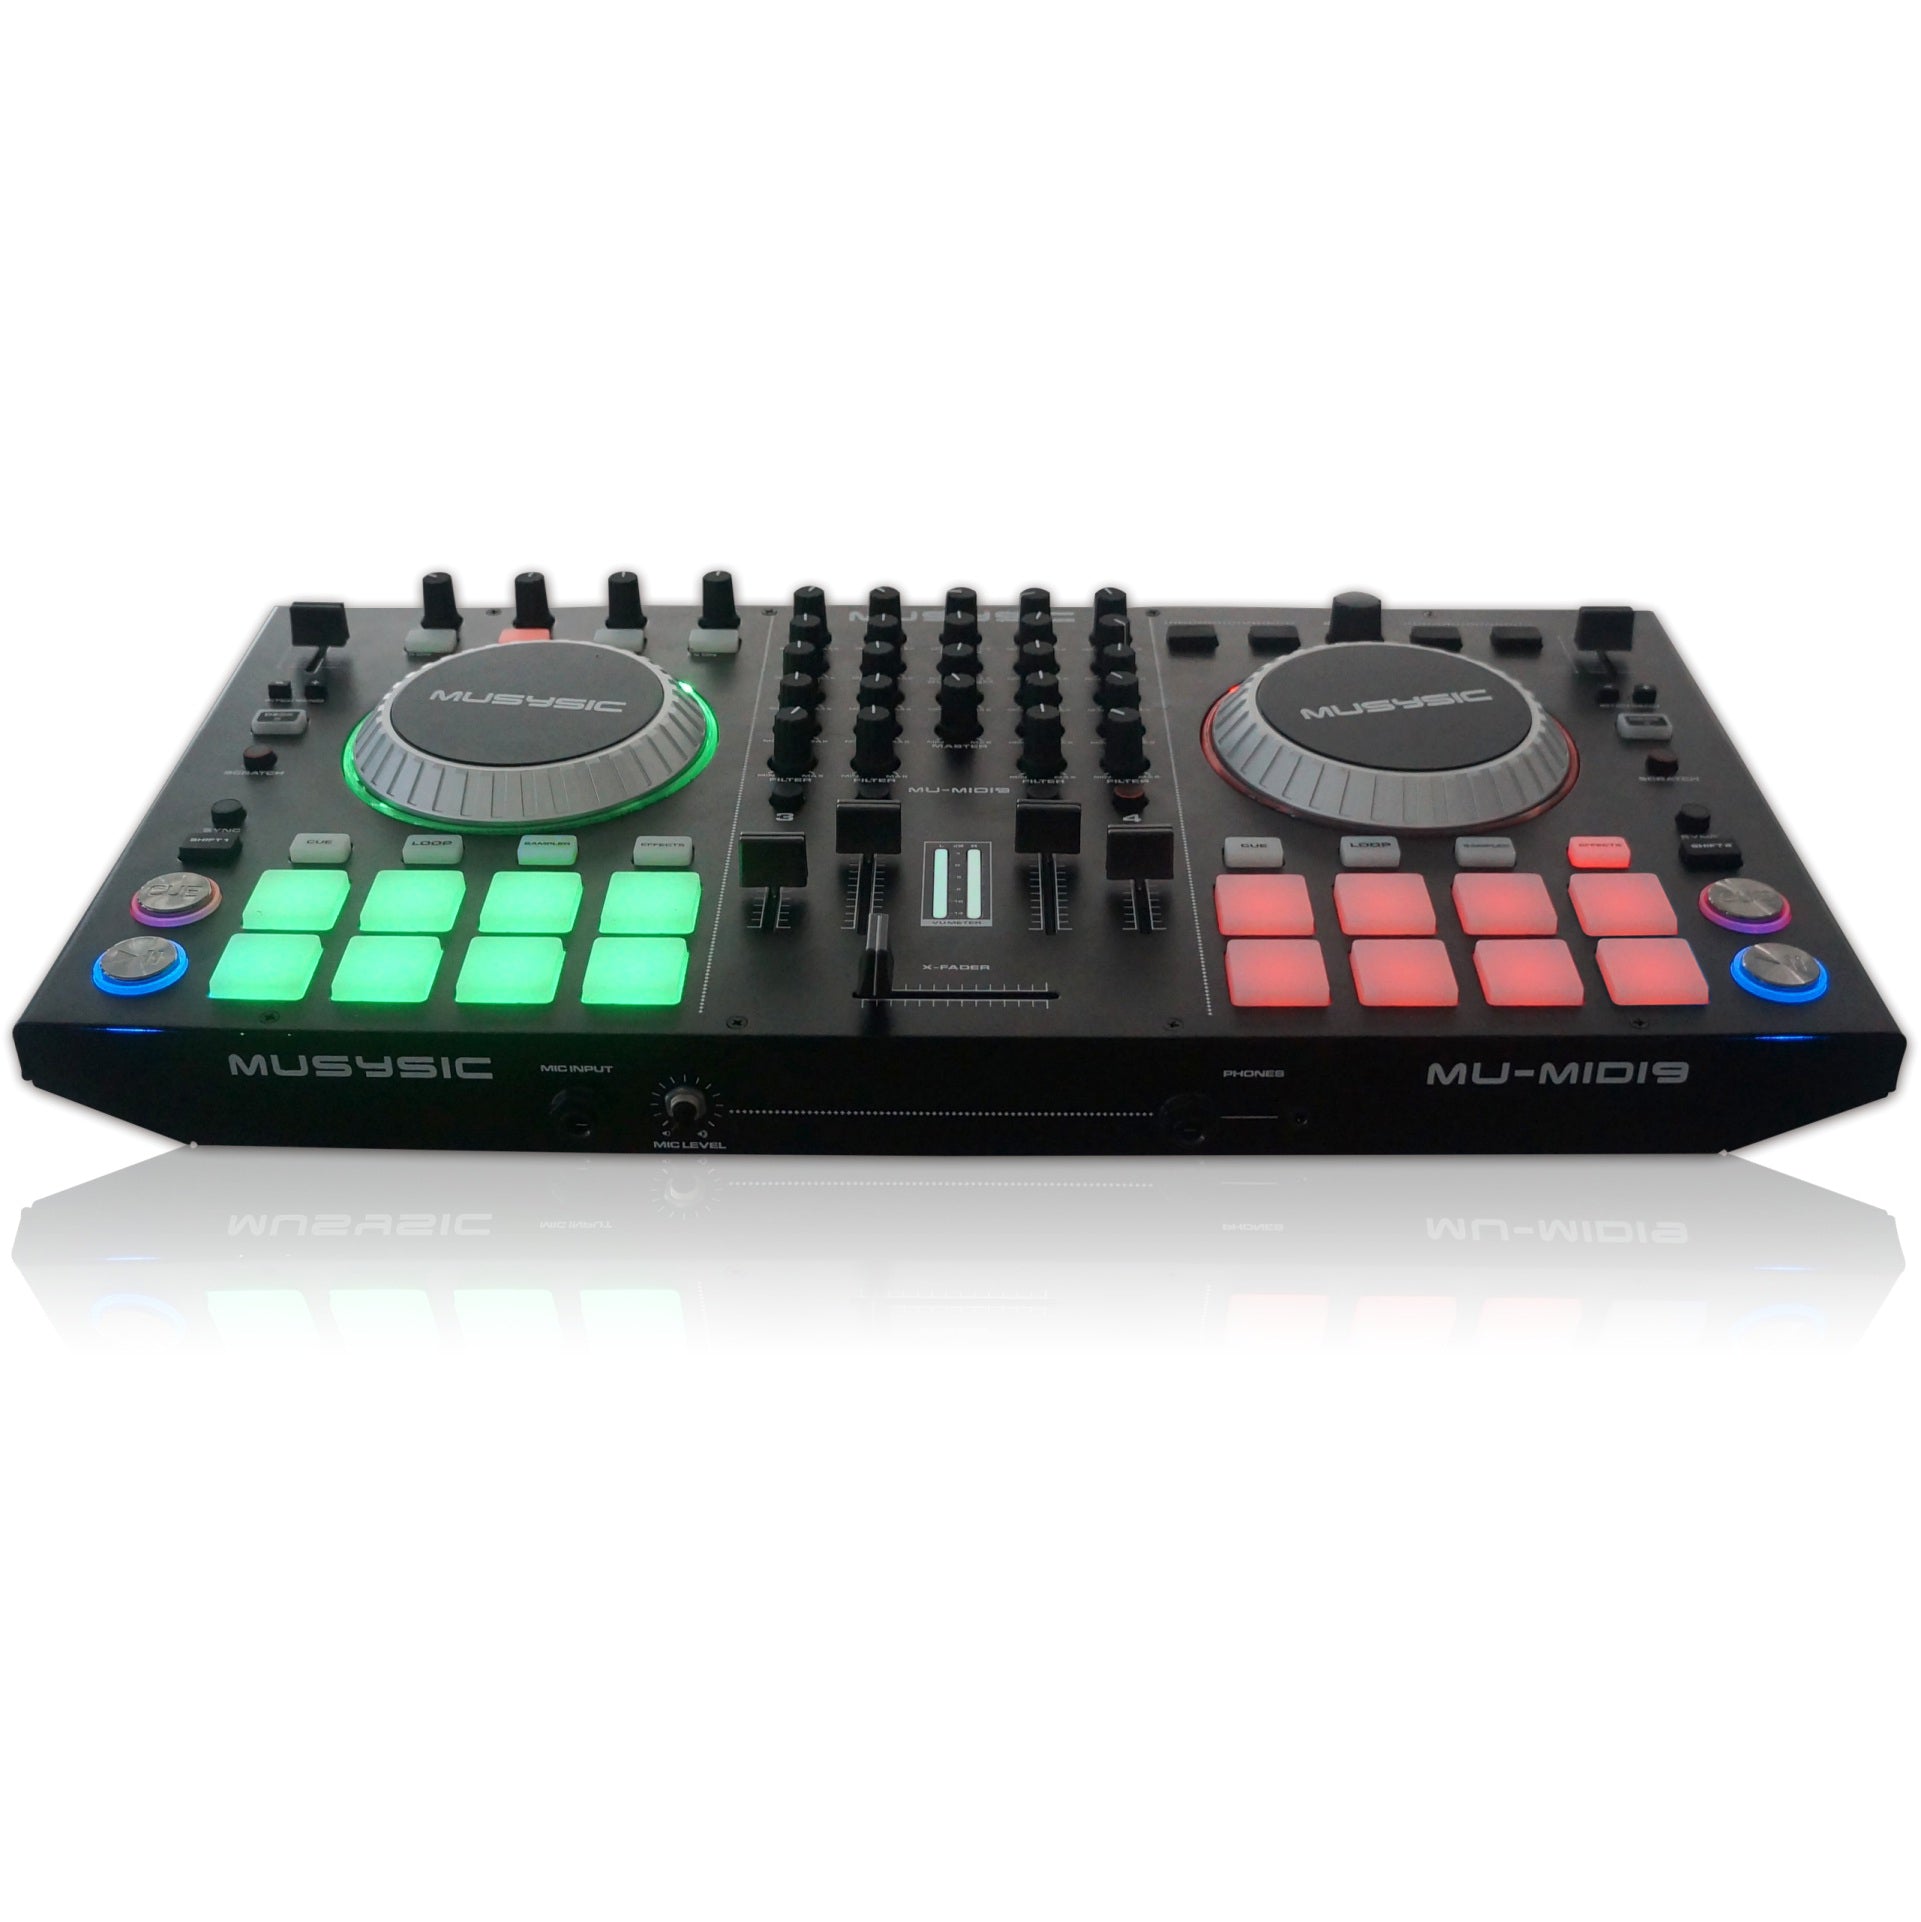 excentrisk Gurgle Let 4-Channel USB MIDI Controller with 8 Soft-Touch Rubber Pads